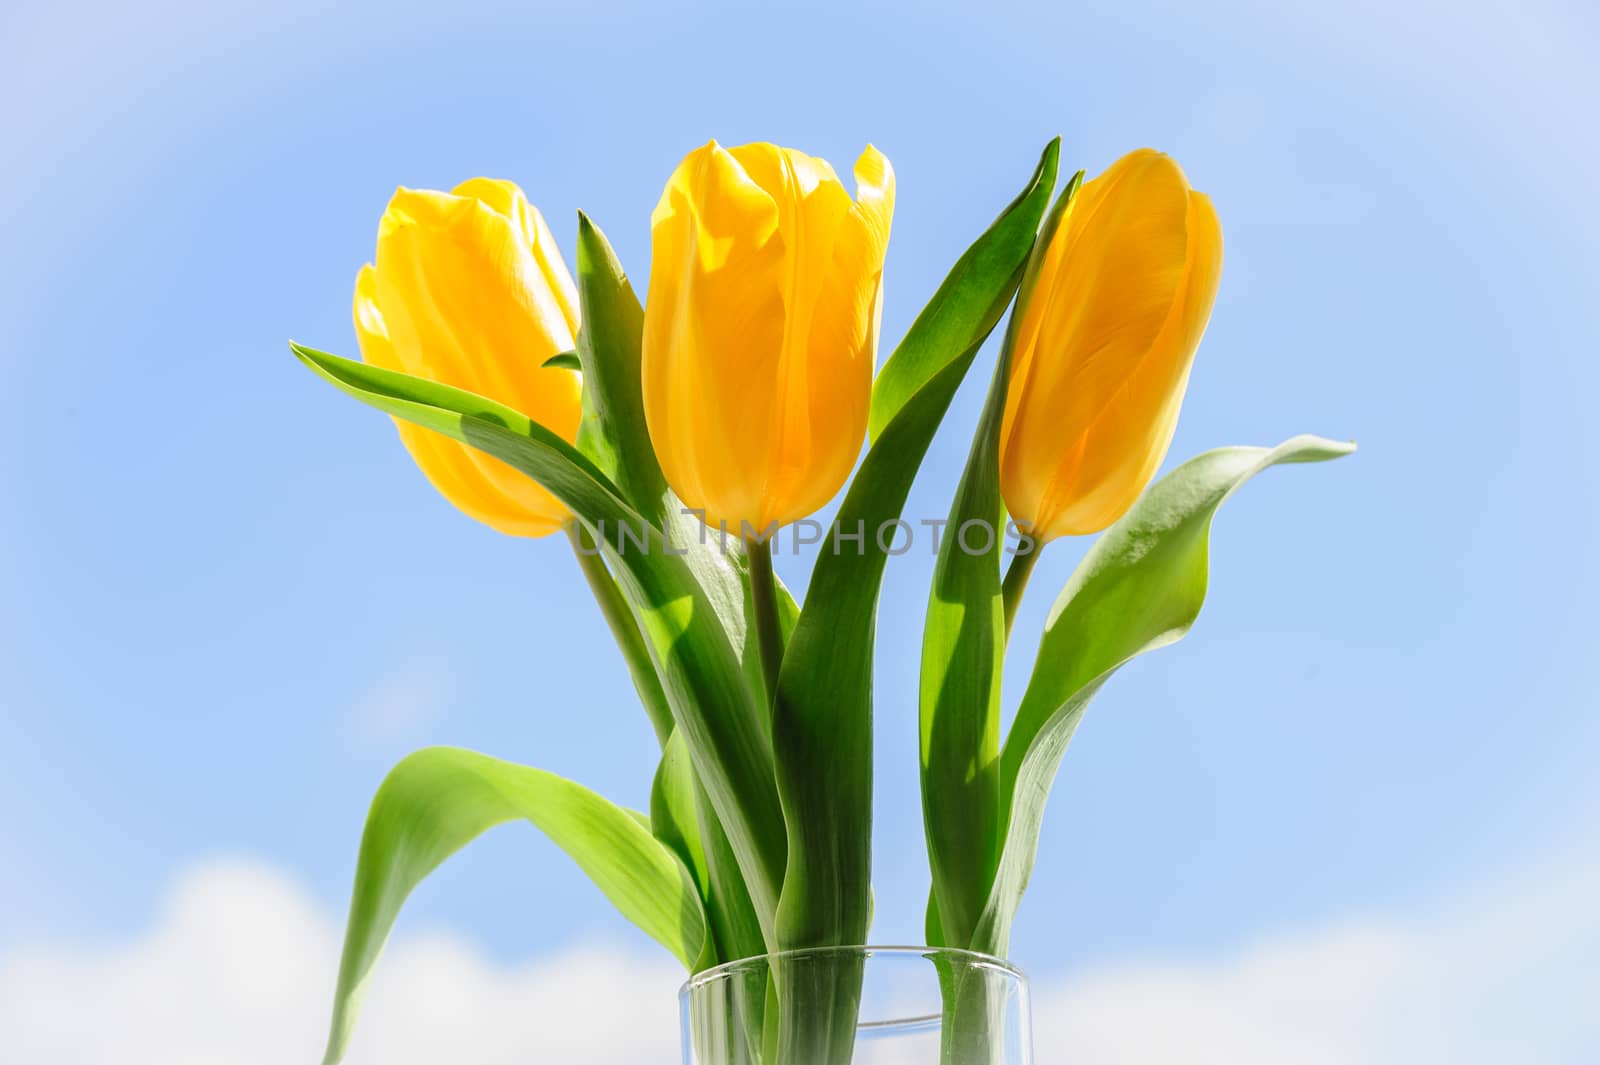 bouquet of three yellow tulips in vase on window sill